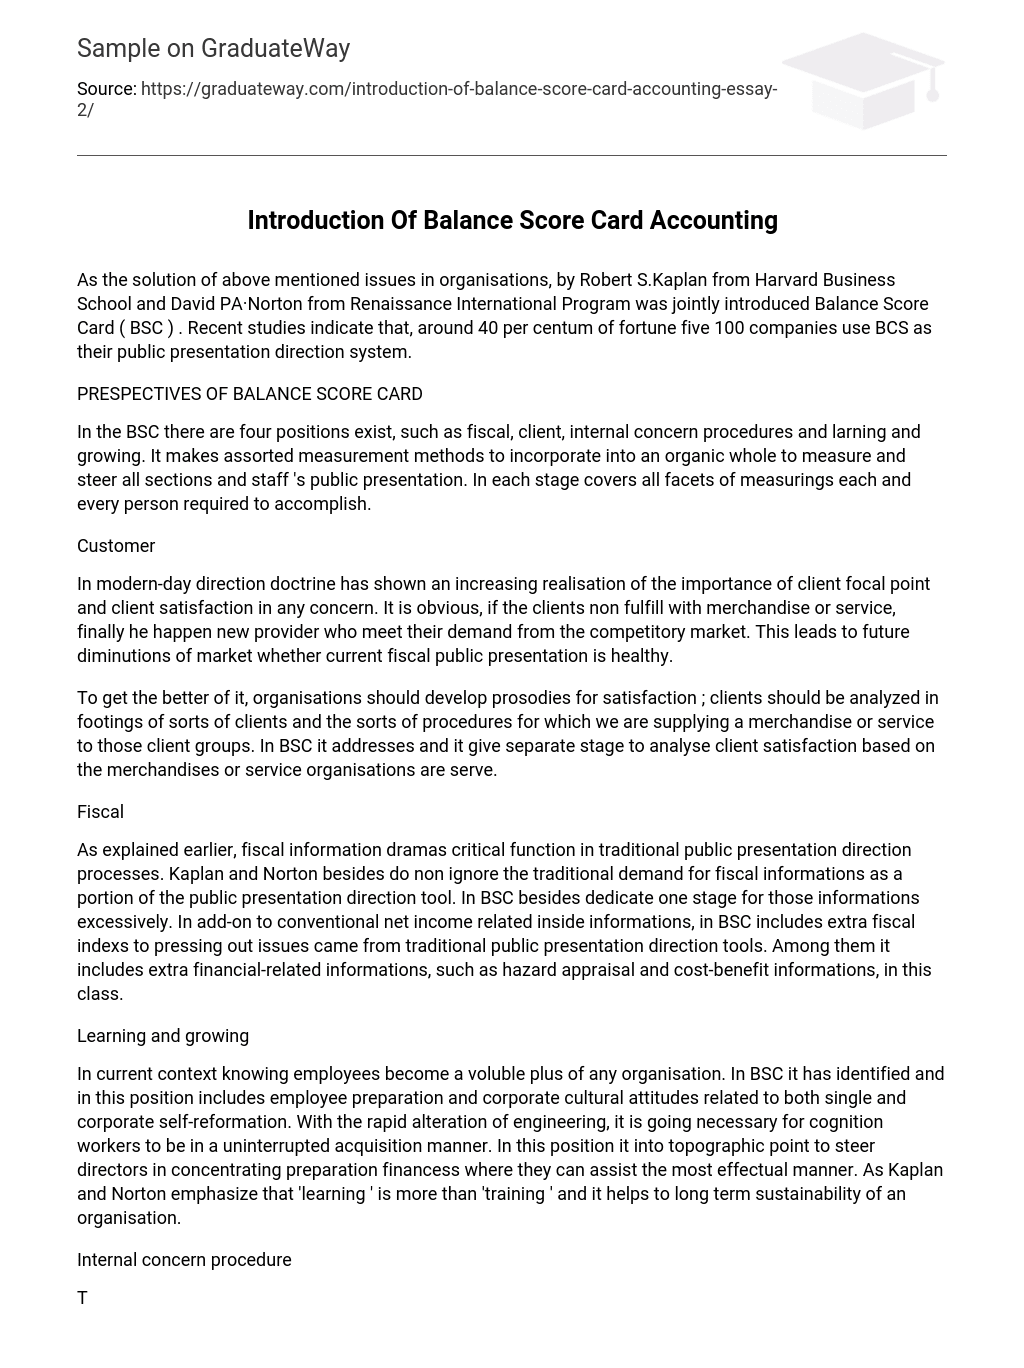 Introduction Of Balance Score Card Accounting